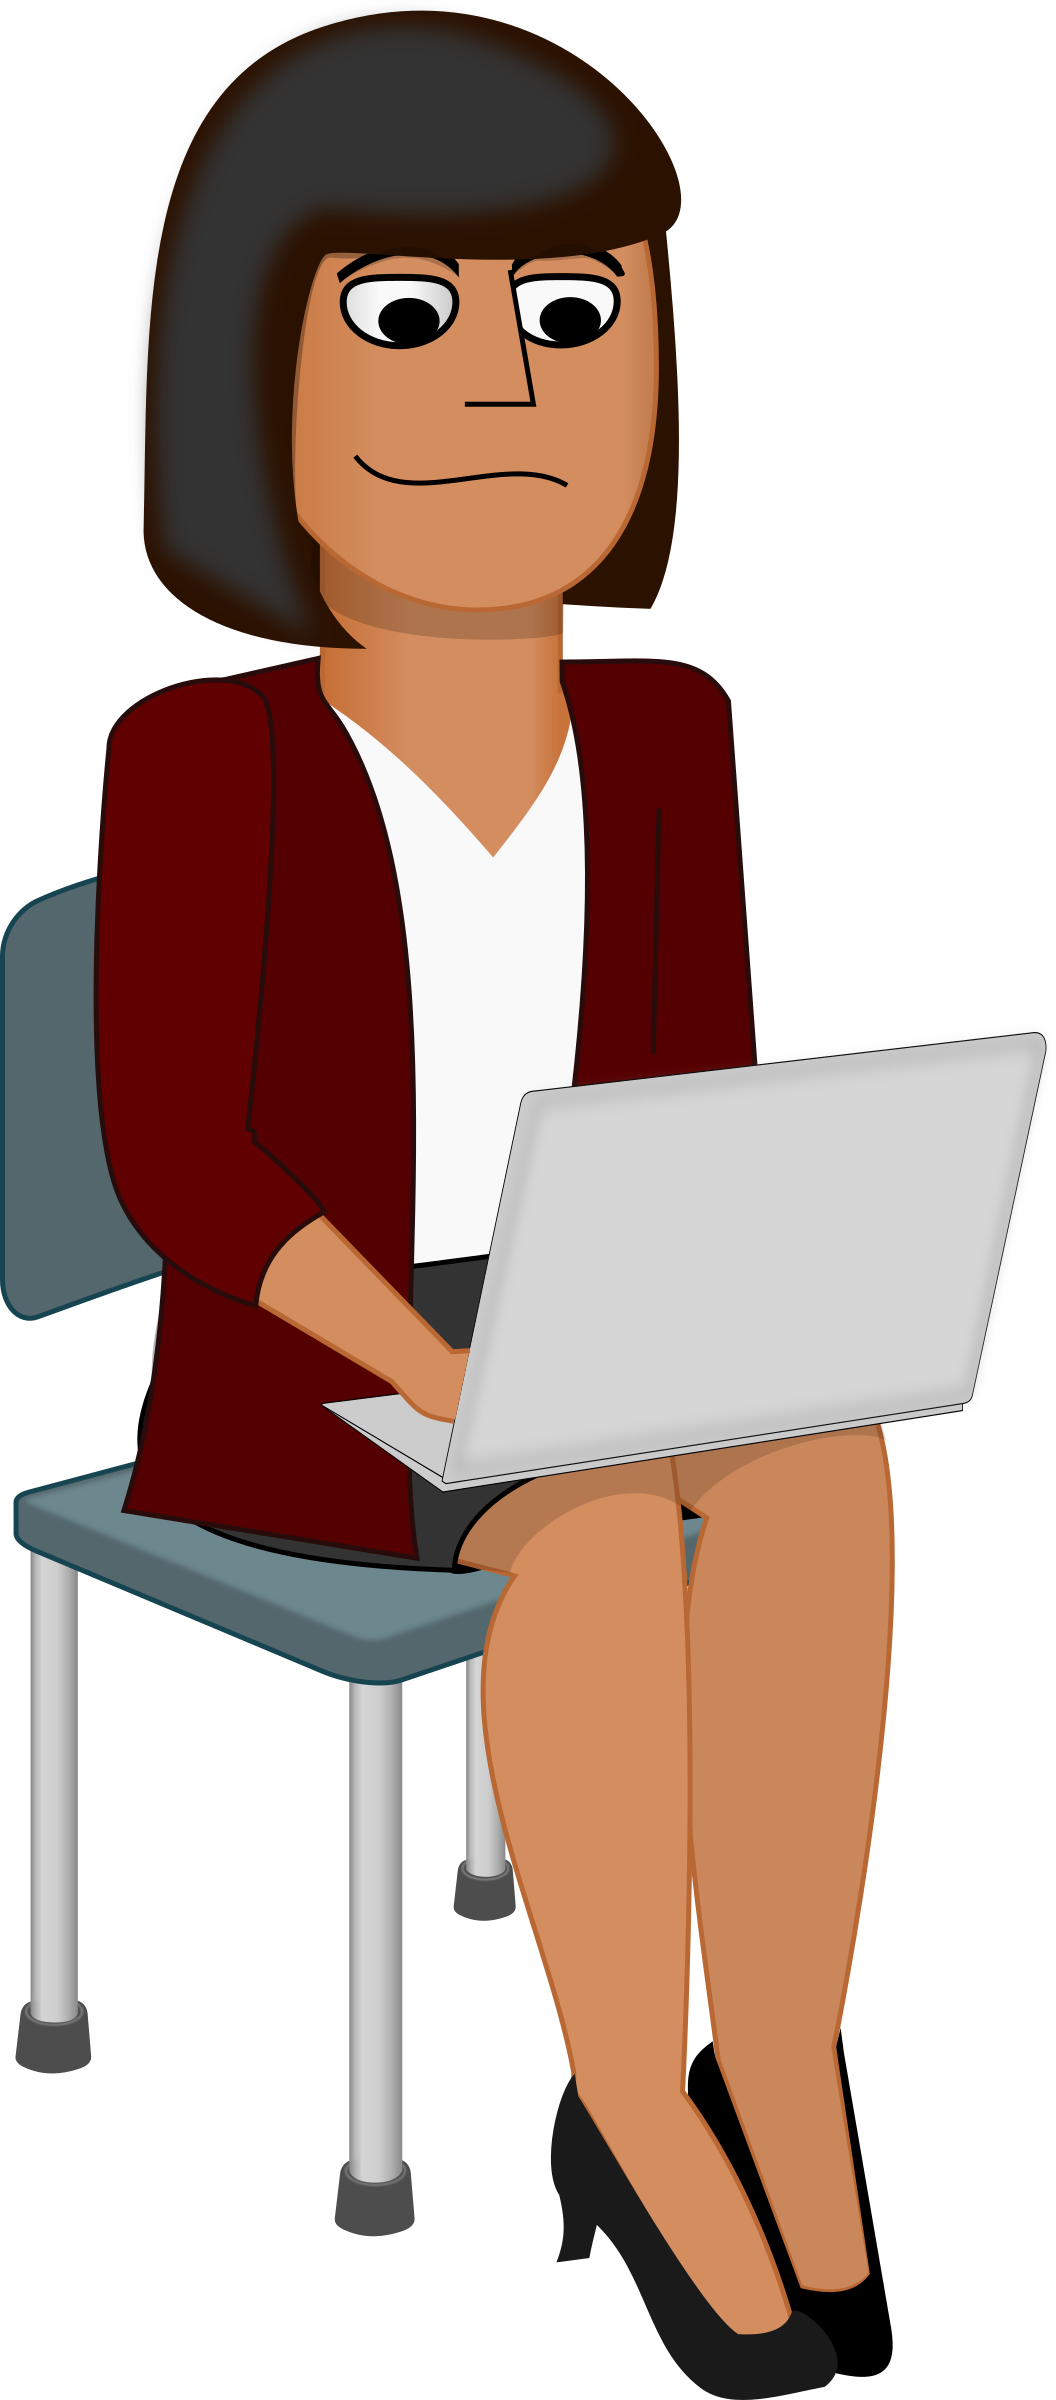 More From My Site - Cartoon Woman At Computer (1056x2400)